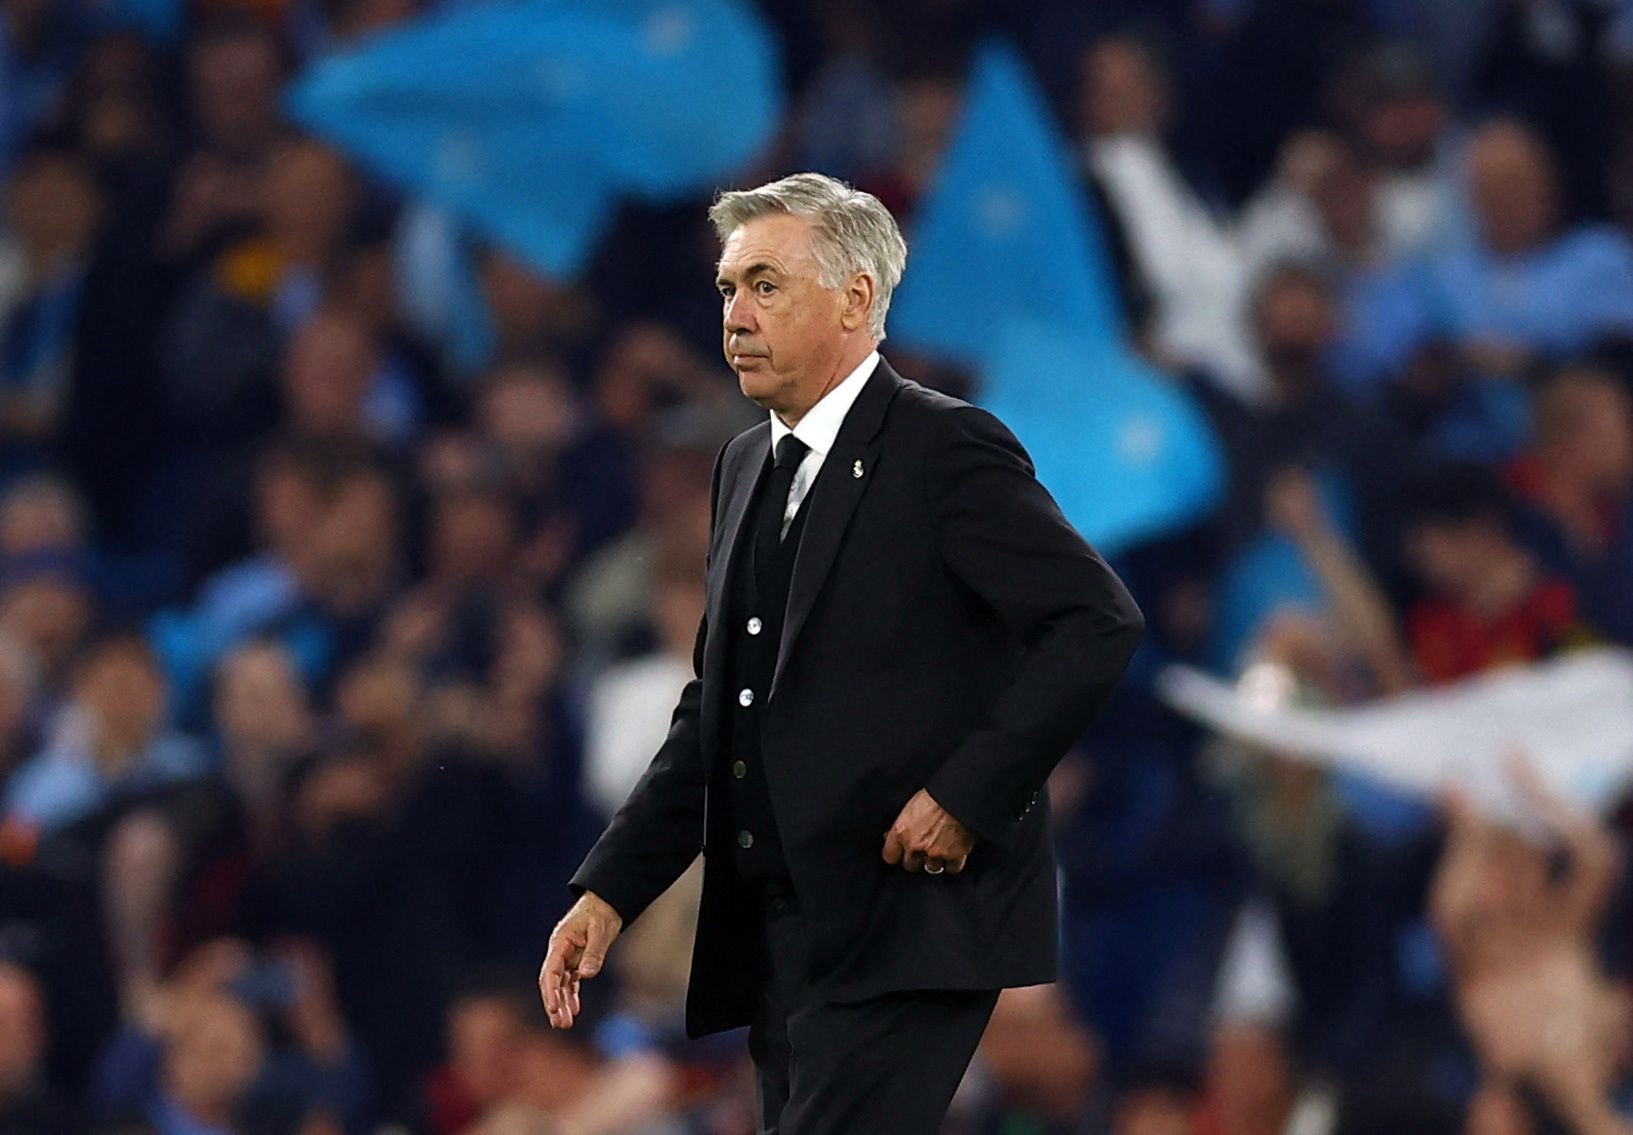 'There's no show', says Real Madrid Manager Carlo Ancelotti in spite of draw against Rayo Vallecano